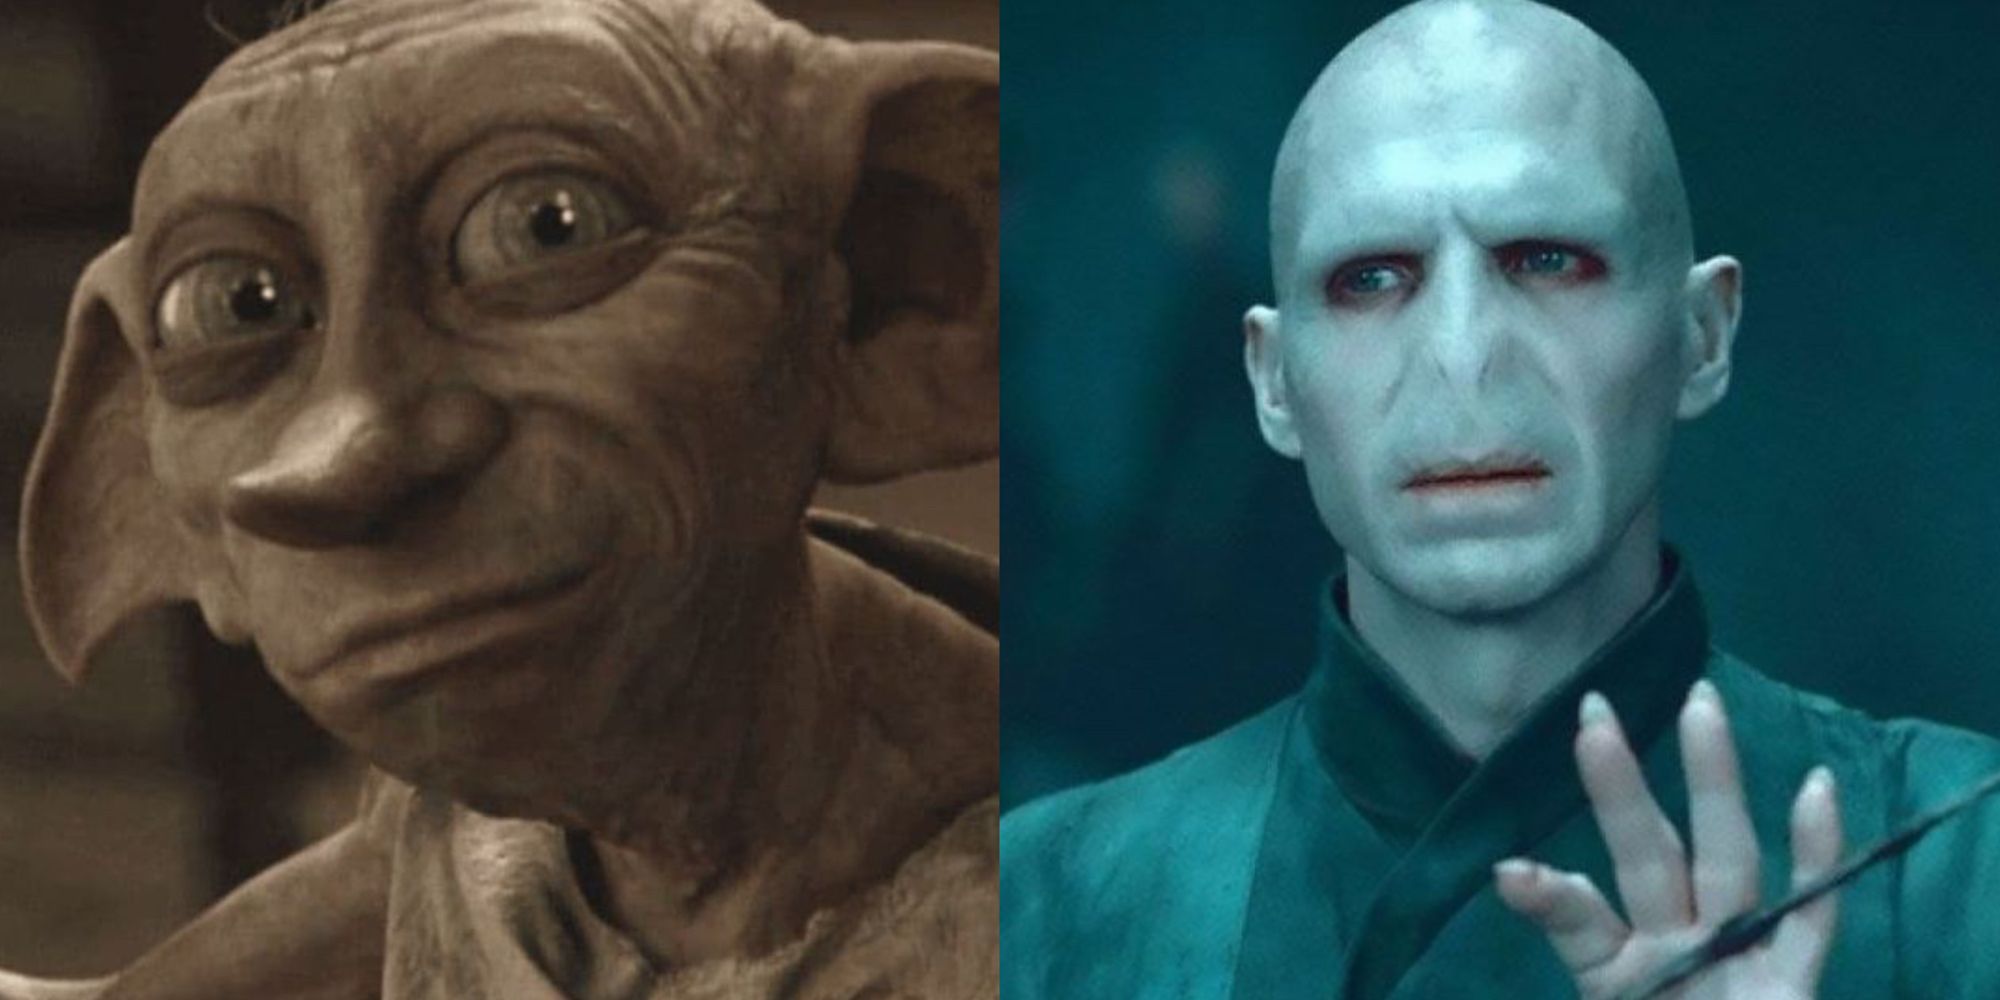 Two images in a collage: Voldemort and Dobby side by side